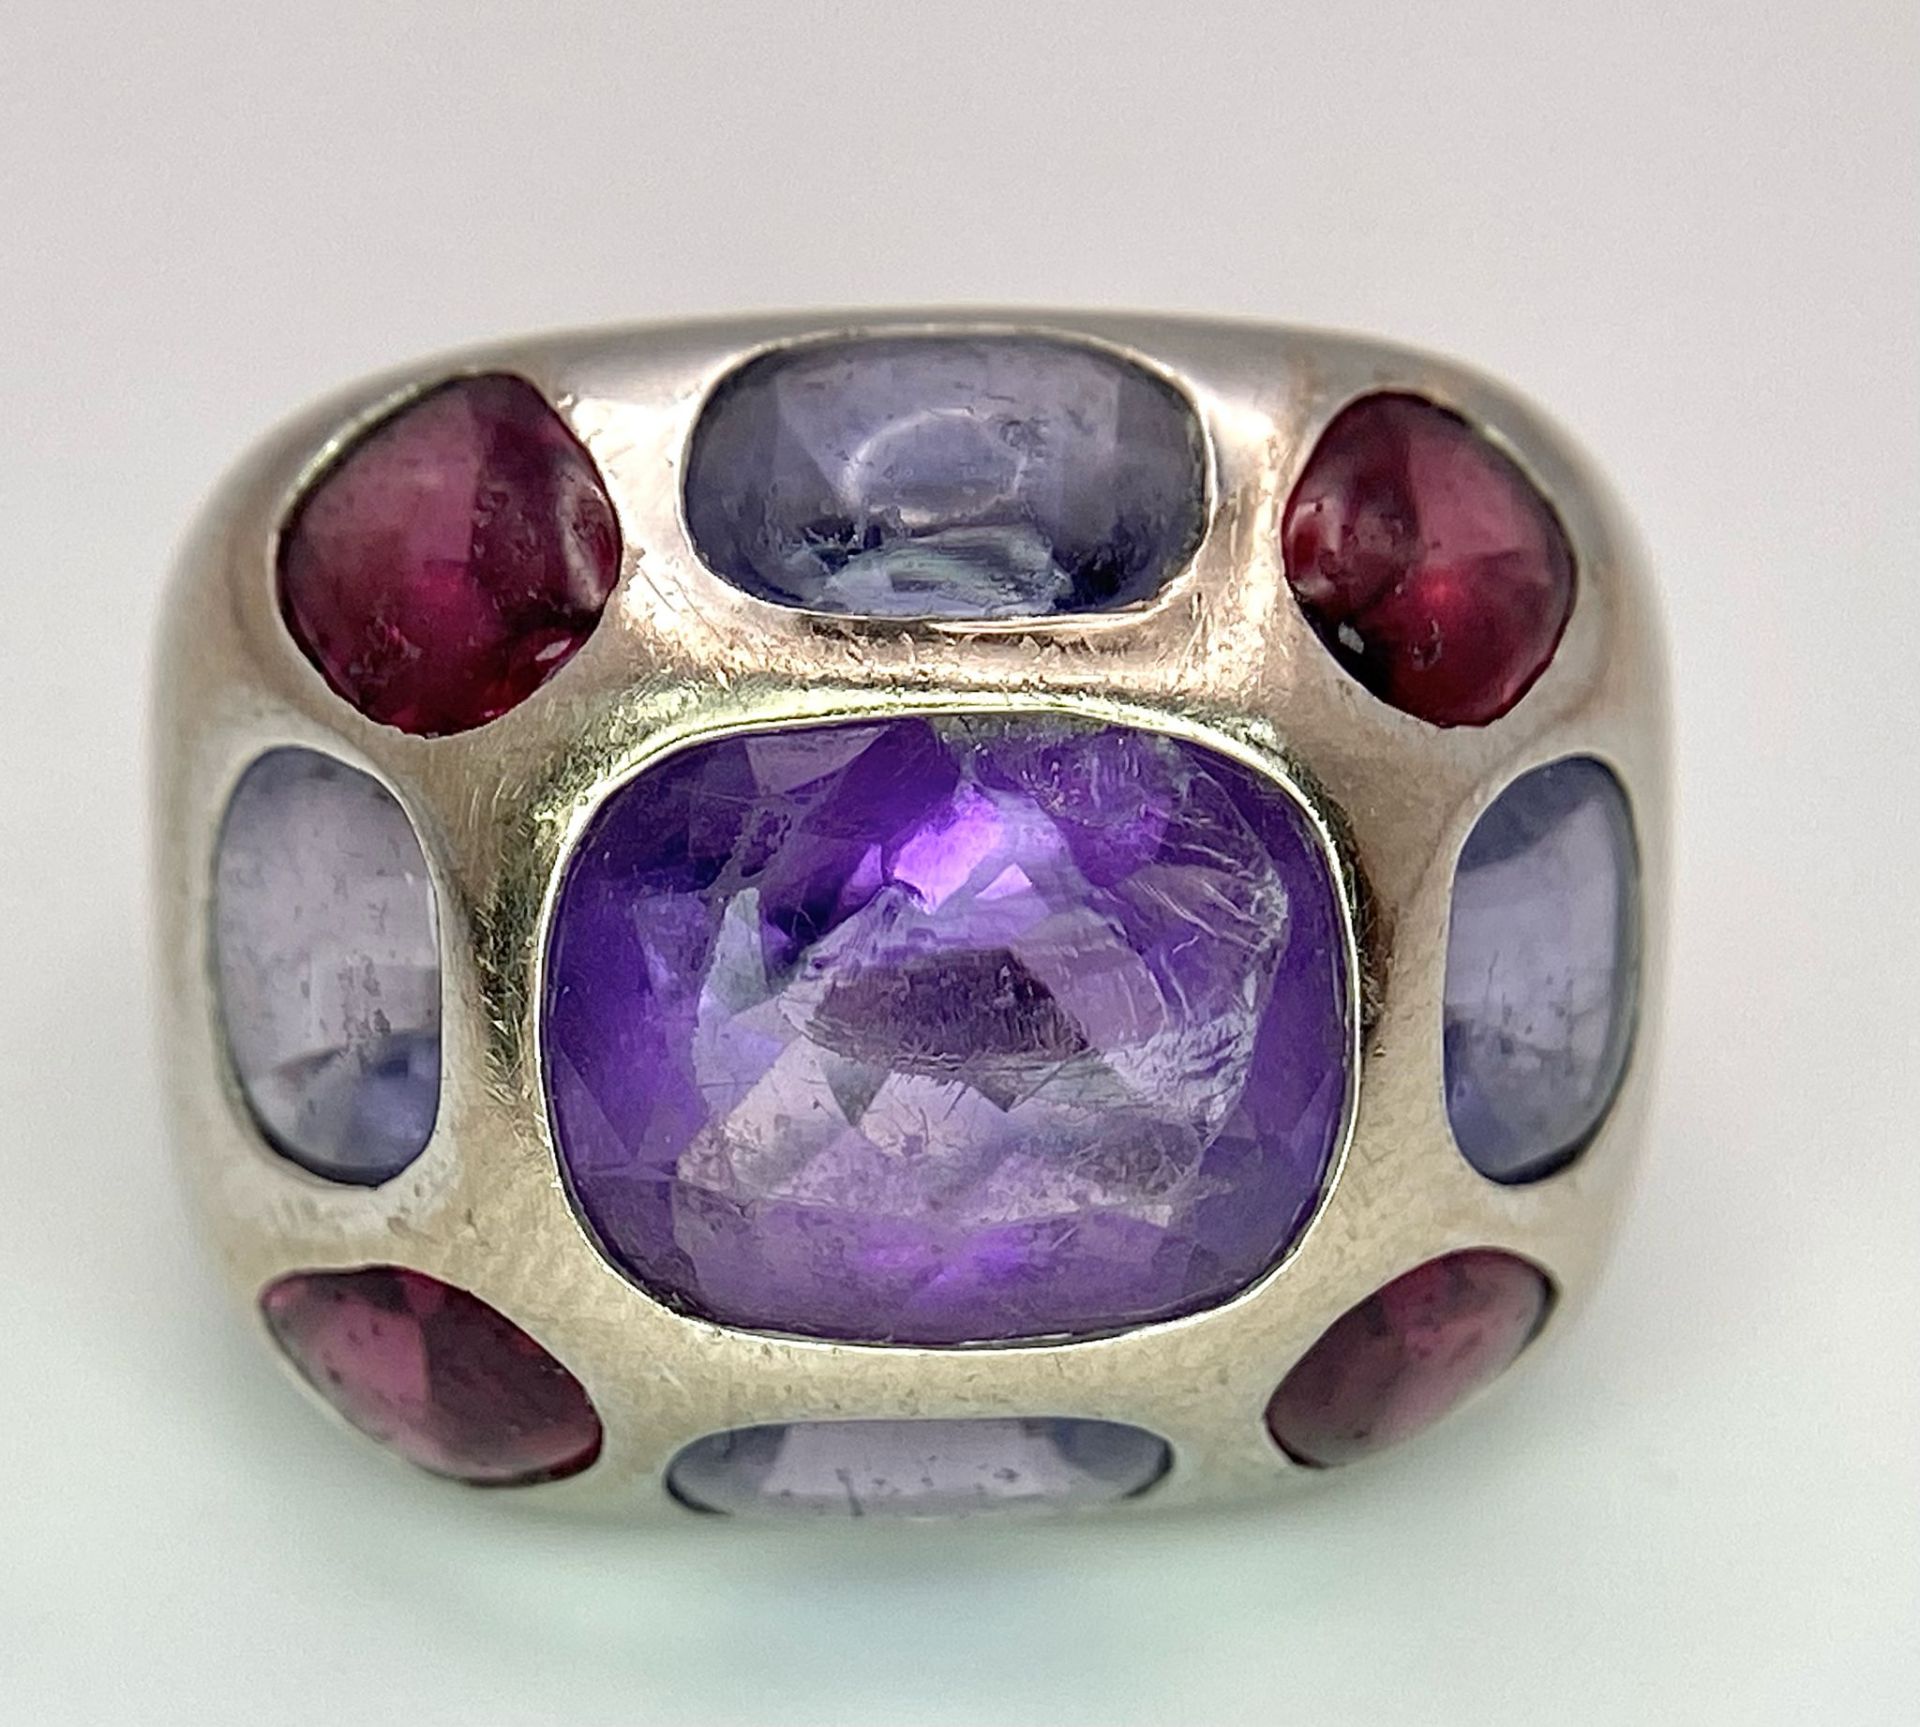 A Chanel Designer 18K White Gold and Amethyst and Garnet Ring. Rectangular cut central amethyst with - Image 5 of 13